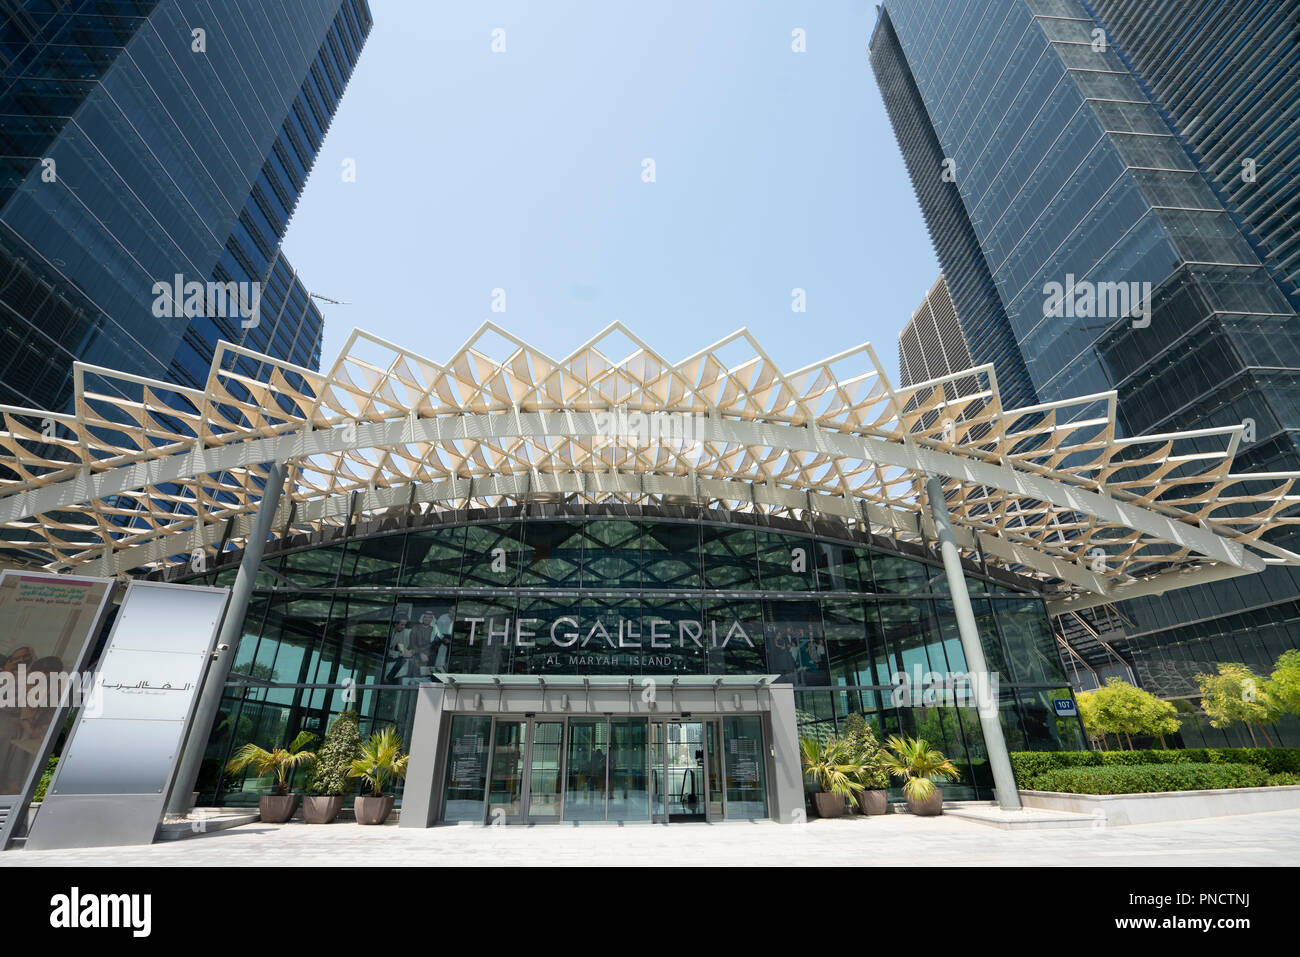 The exterior of The Galleria shopping mall in Abu Dhabi Stock Photo - Alamy